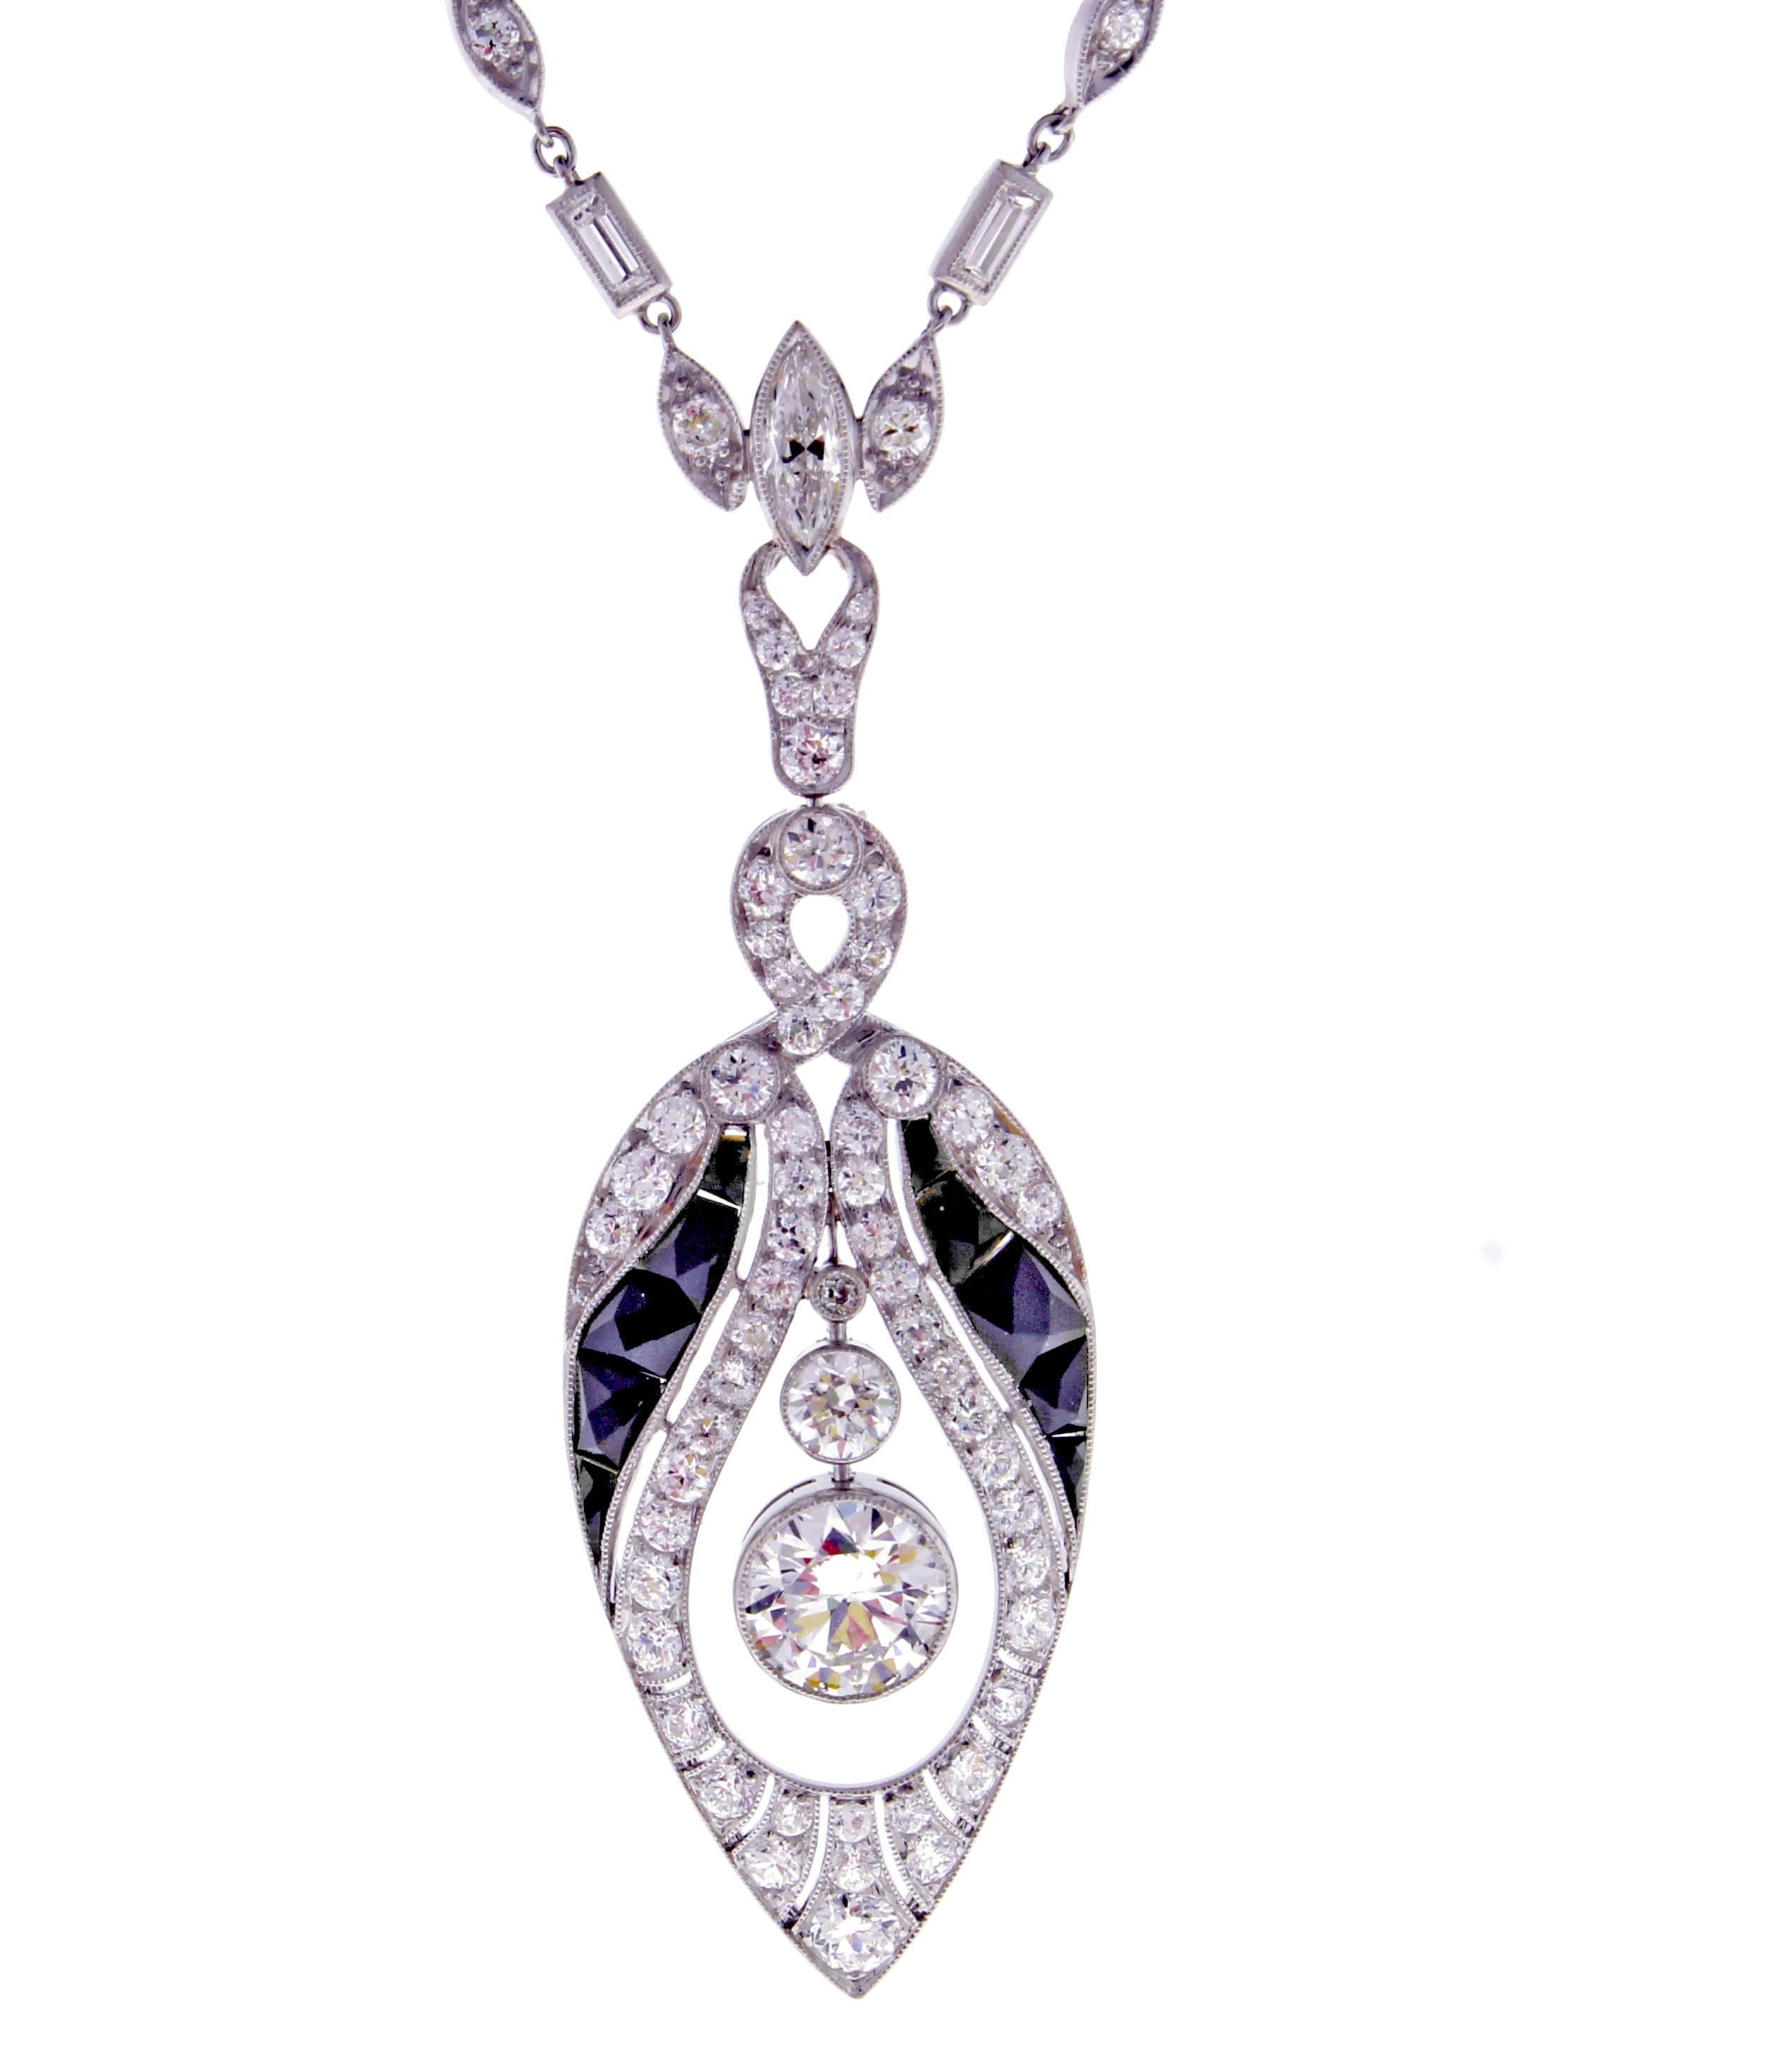 An exceptional example of Art Deco style, this sautoir necklace exemplifies the grace and elegance of the 1920s.
The platinum necklace boasts over 6 carats of round, baguette and marquise cut diamonds. The center old European cut diamonds weighs